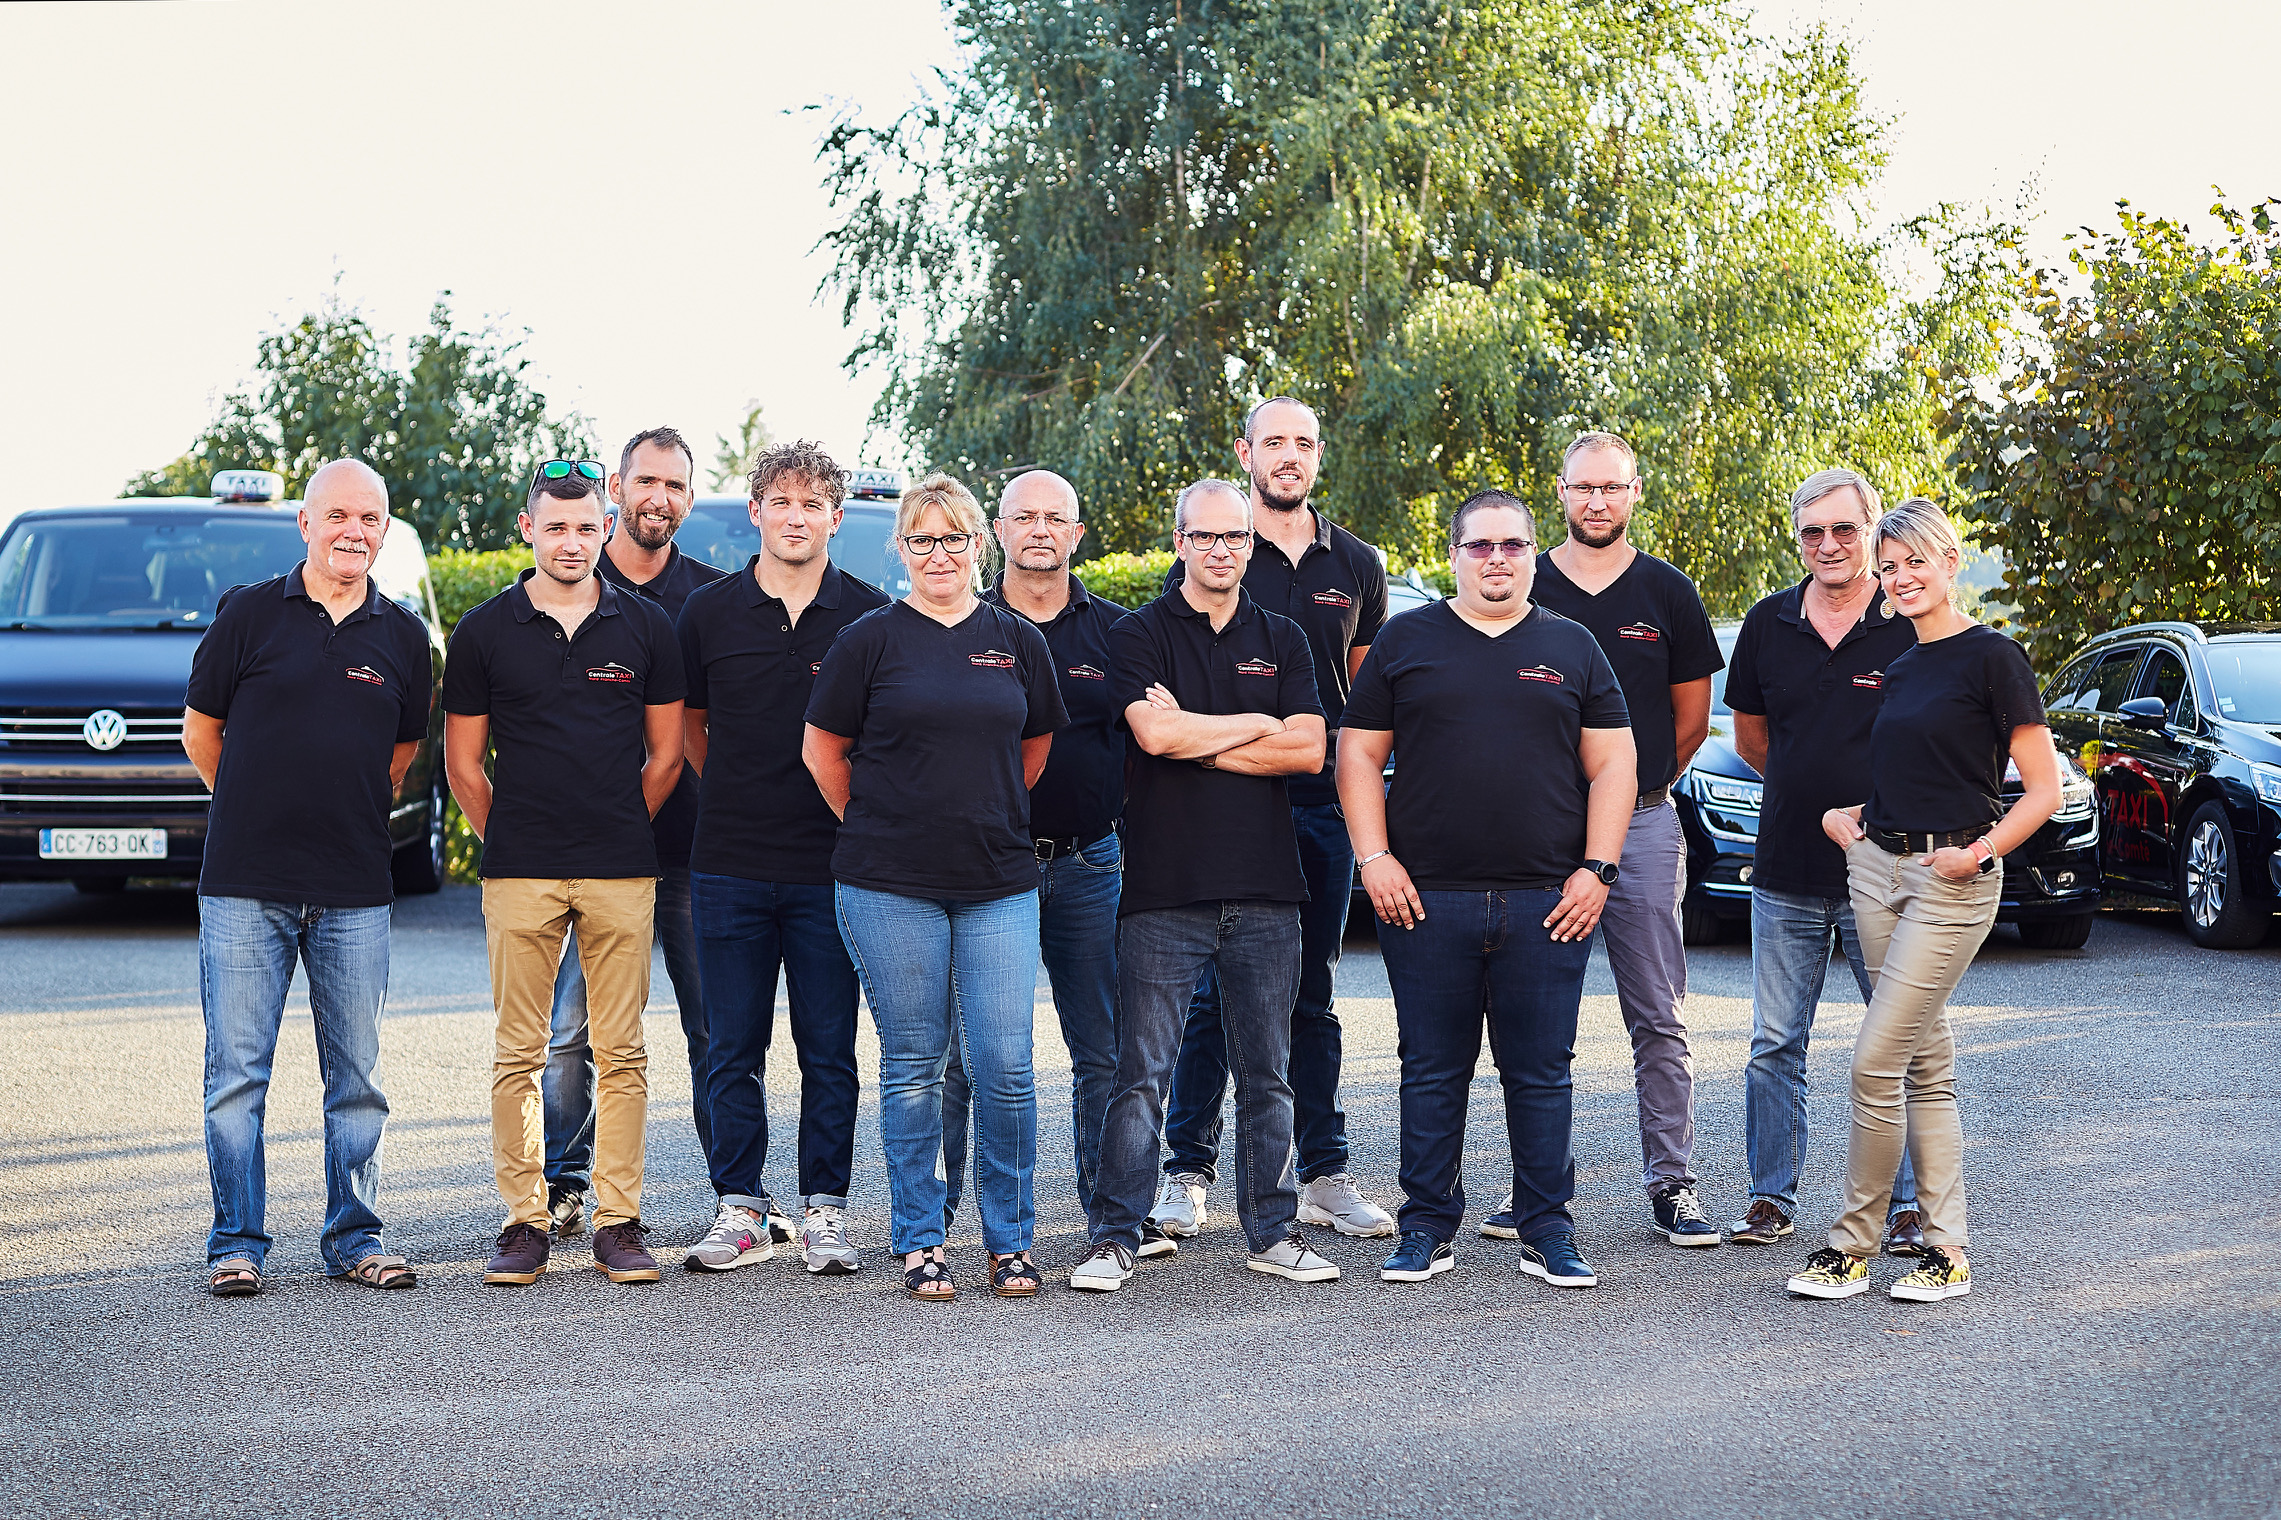 Equipe Centrale Taxi Chalonvillars